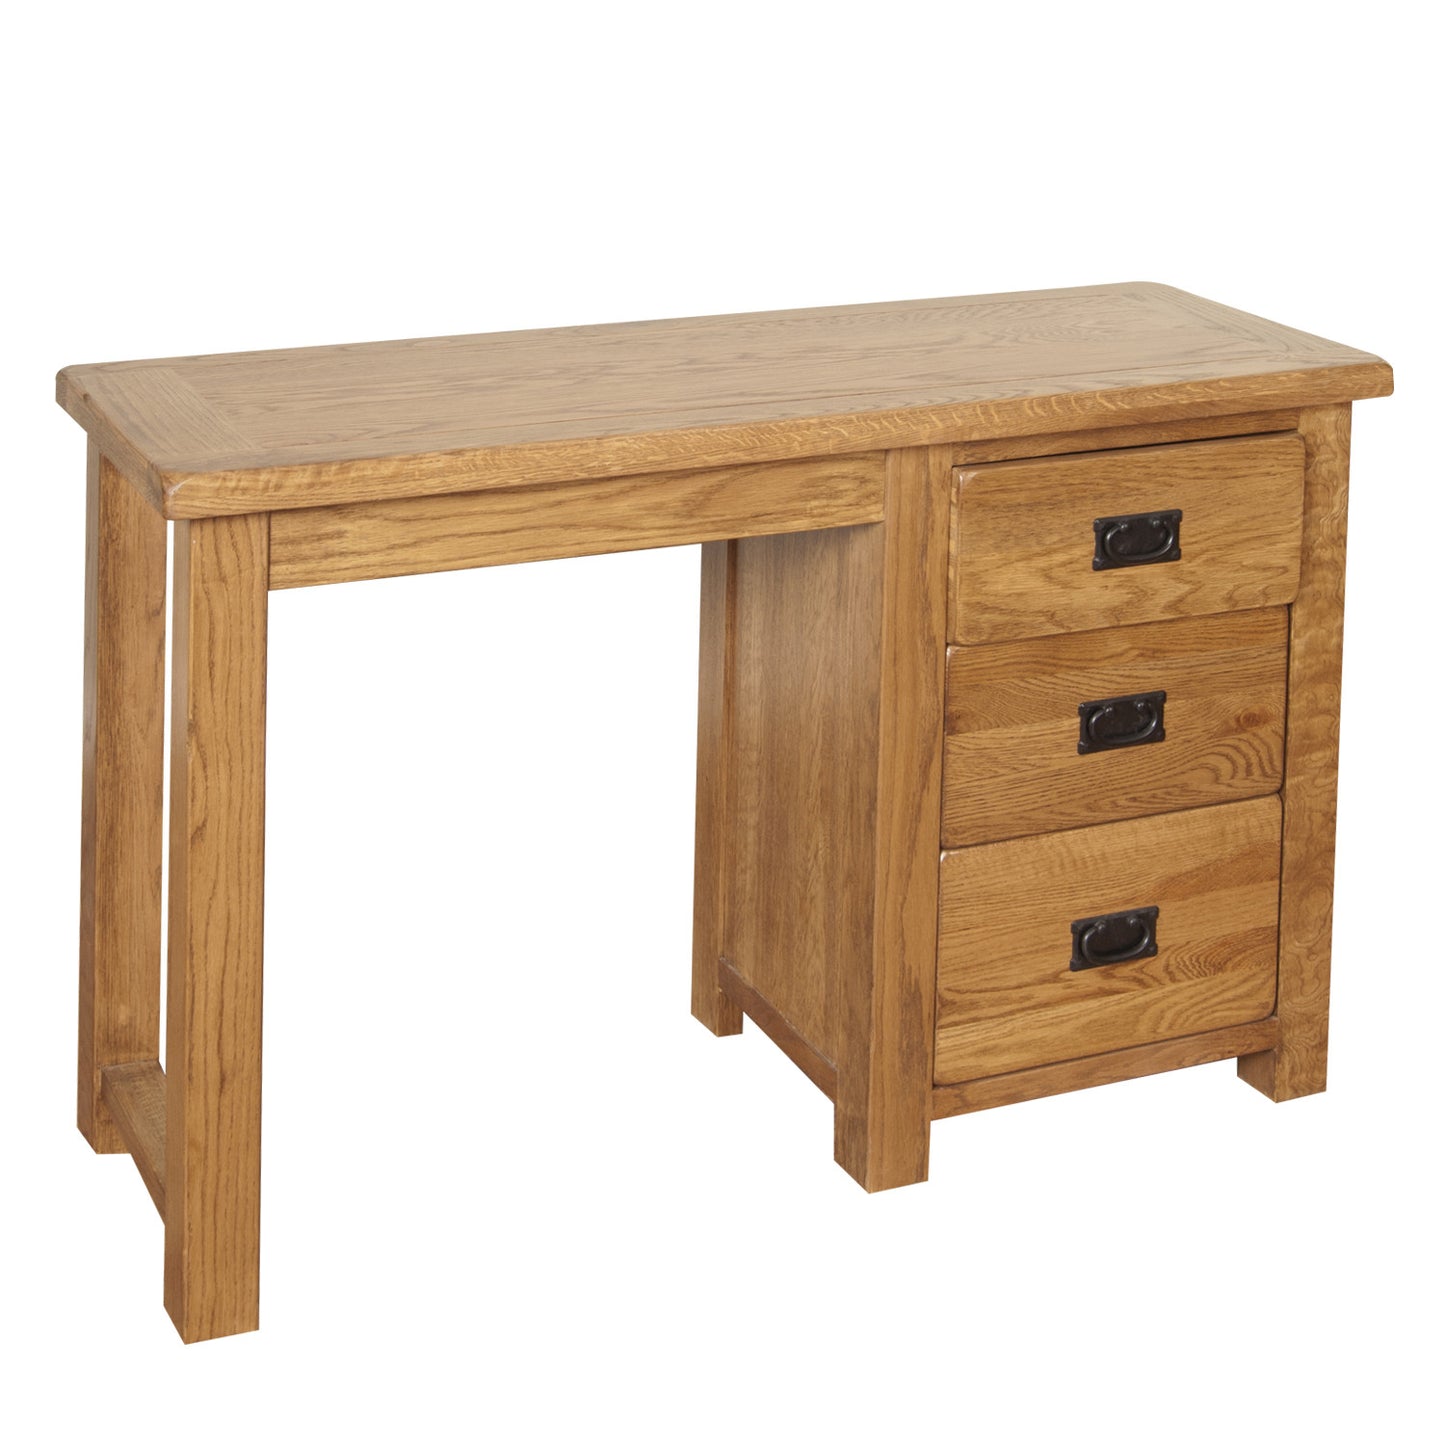 Auvergne Solid Oak Dressing Table - Single Pedestal - Better Furniture Norwich & Great Yarmouth